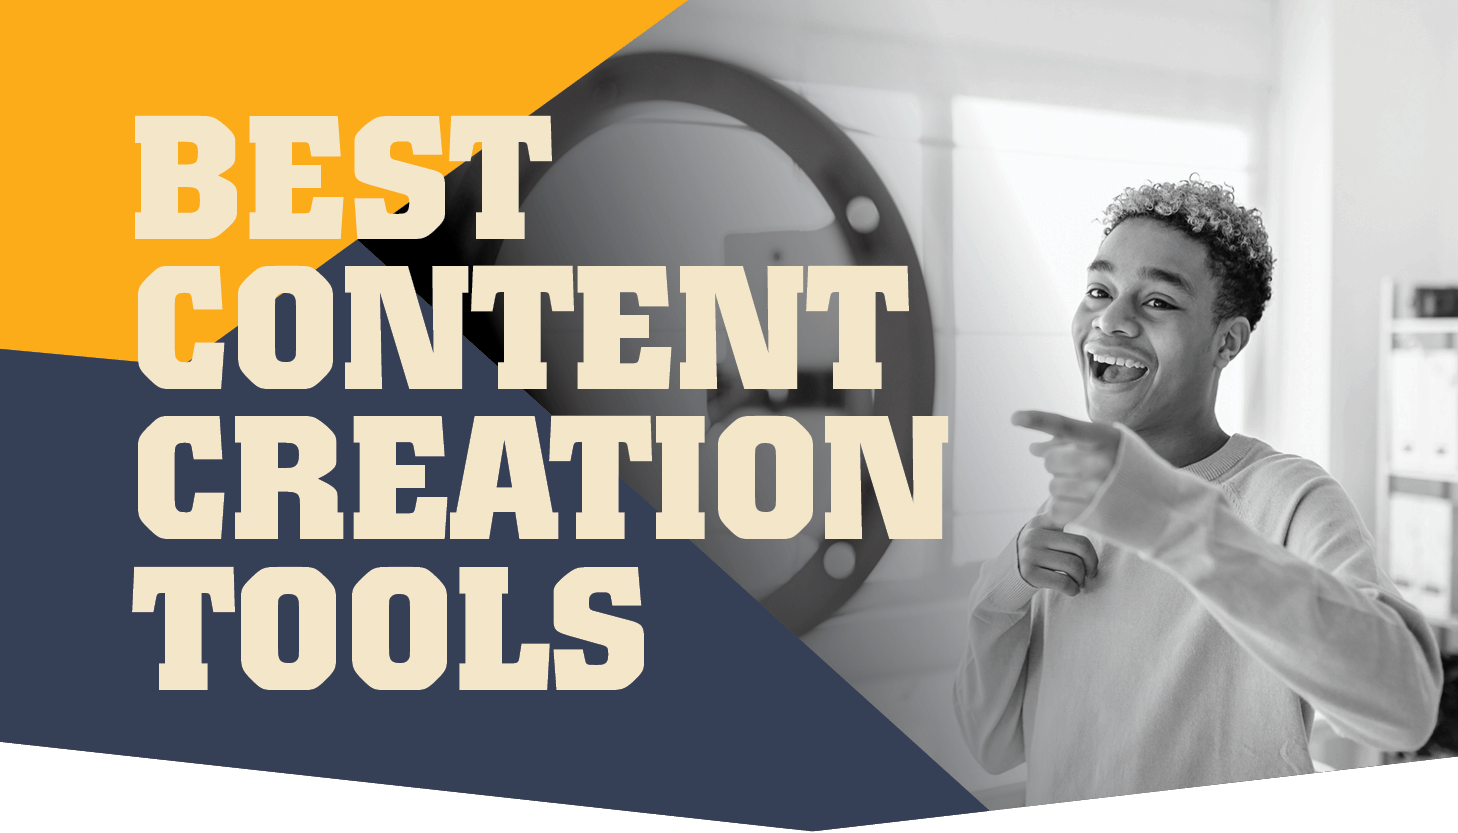 Best content creation tools.